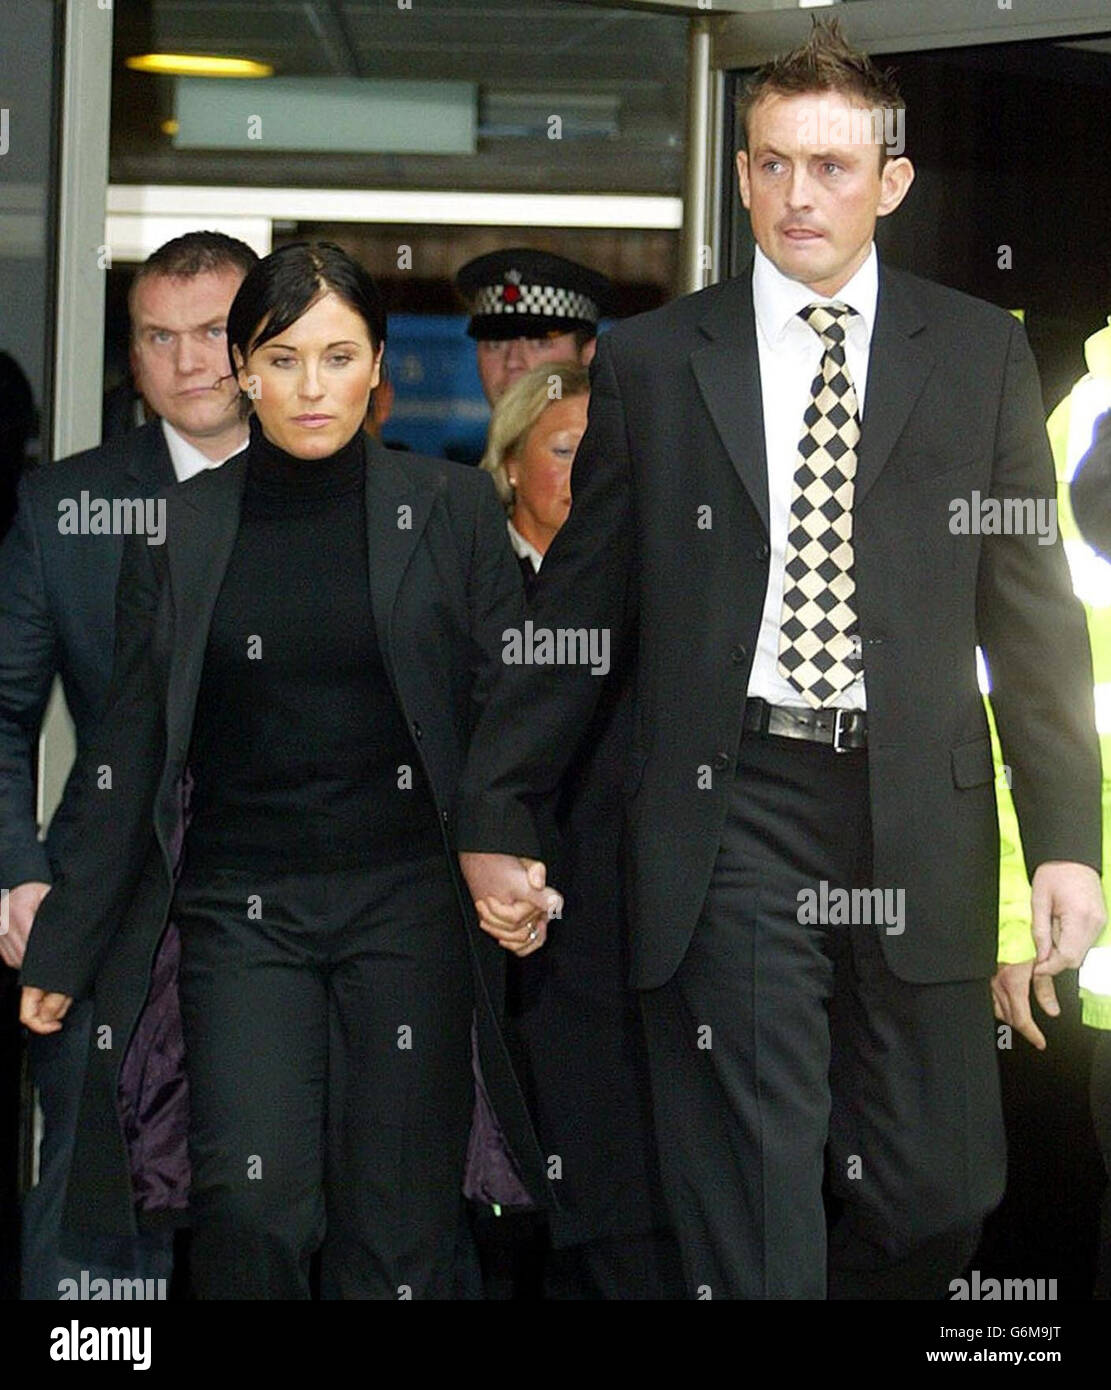 EastEnders actress Jessie Wallace, real name Karen Wallace accompanied by her boyfriend David Morgan (right), leaves Southend Magistrates Court after admitting drink driving. Wallace, who plays the character Kat Slater in the BBC soap, was banned from driving for three years and fined 1,000 after failing a breath test in March. Stock Photo